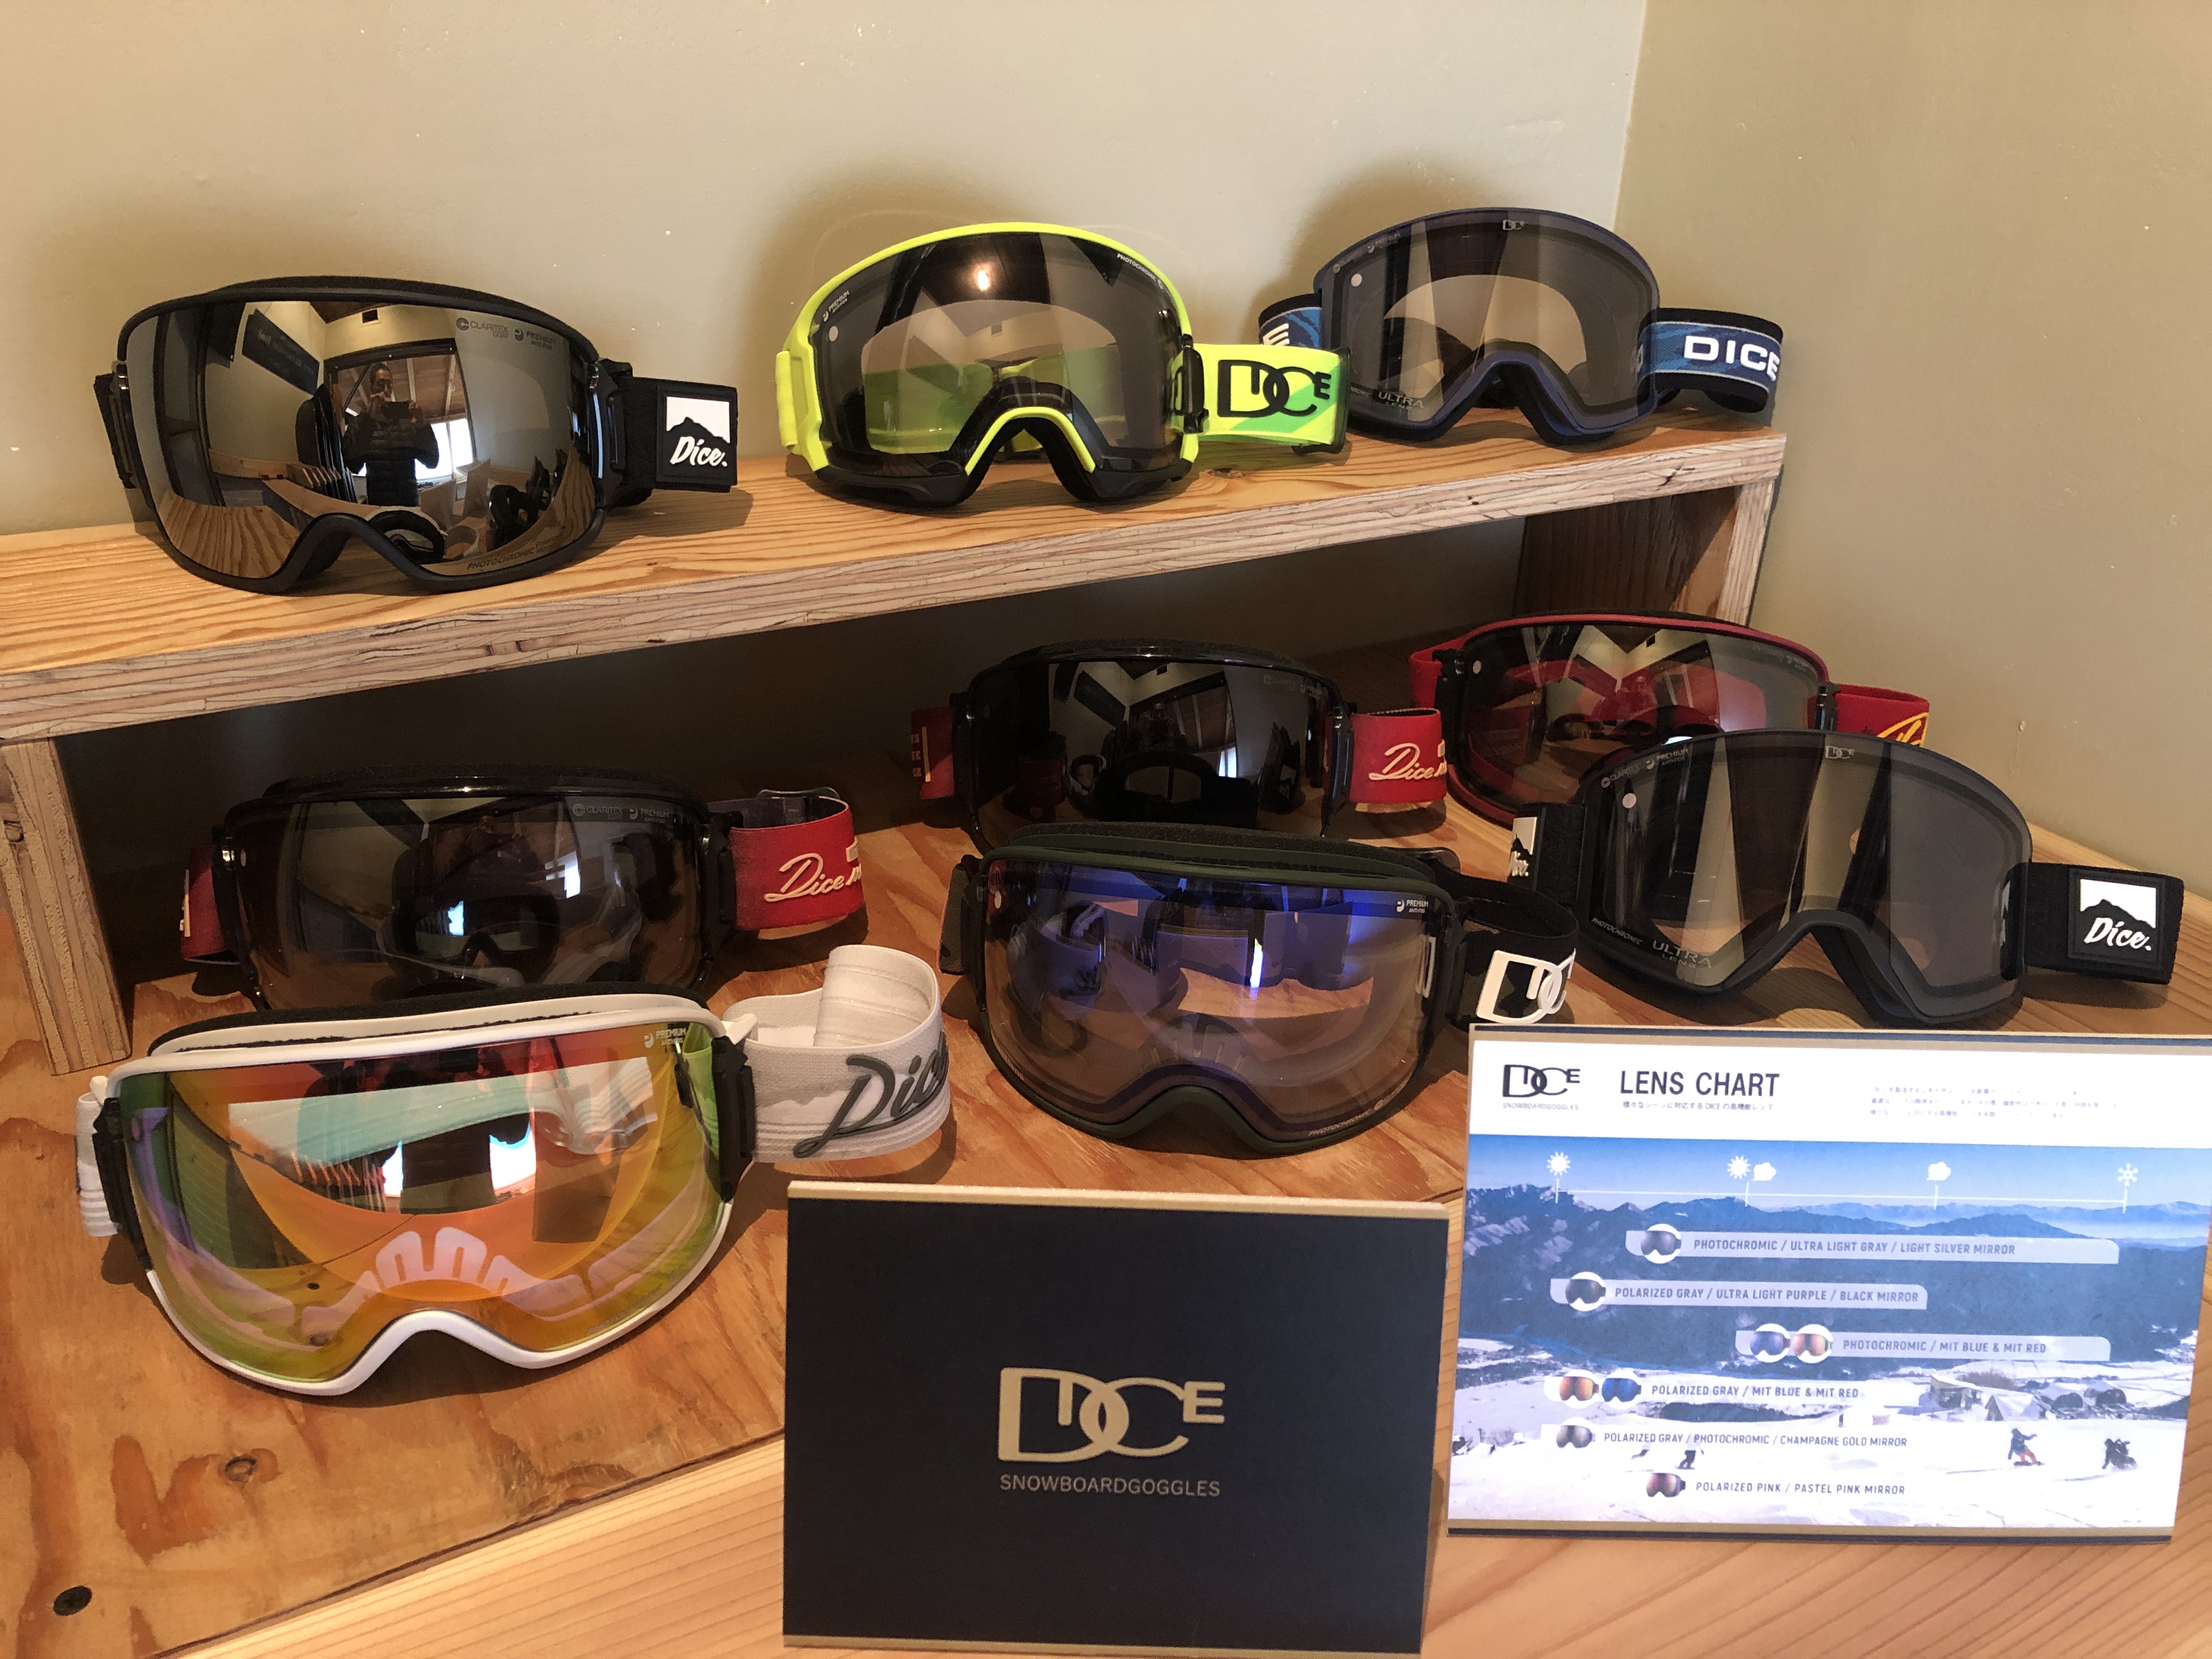 DICE snowboarding goggles (公式) (@DiceGoggles) / Twitter